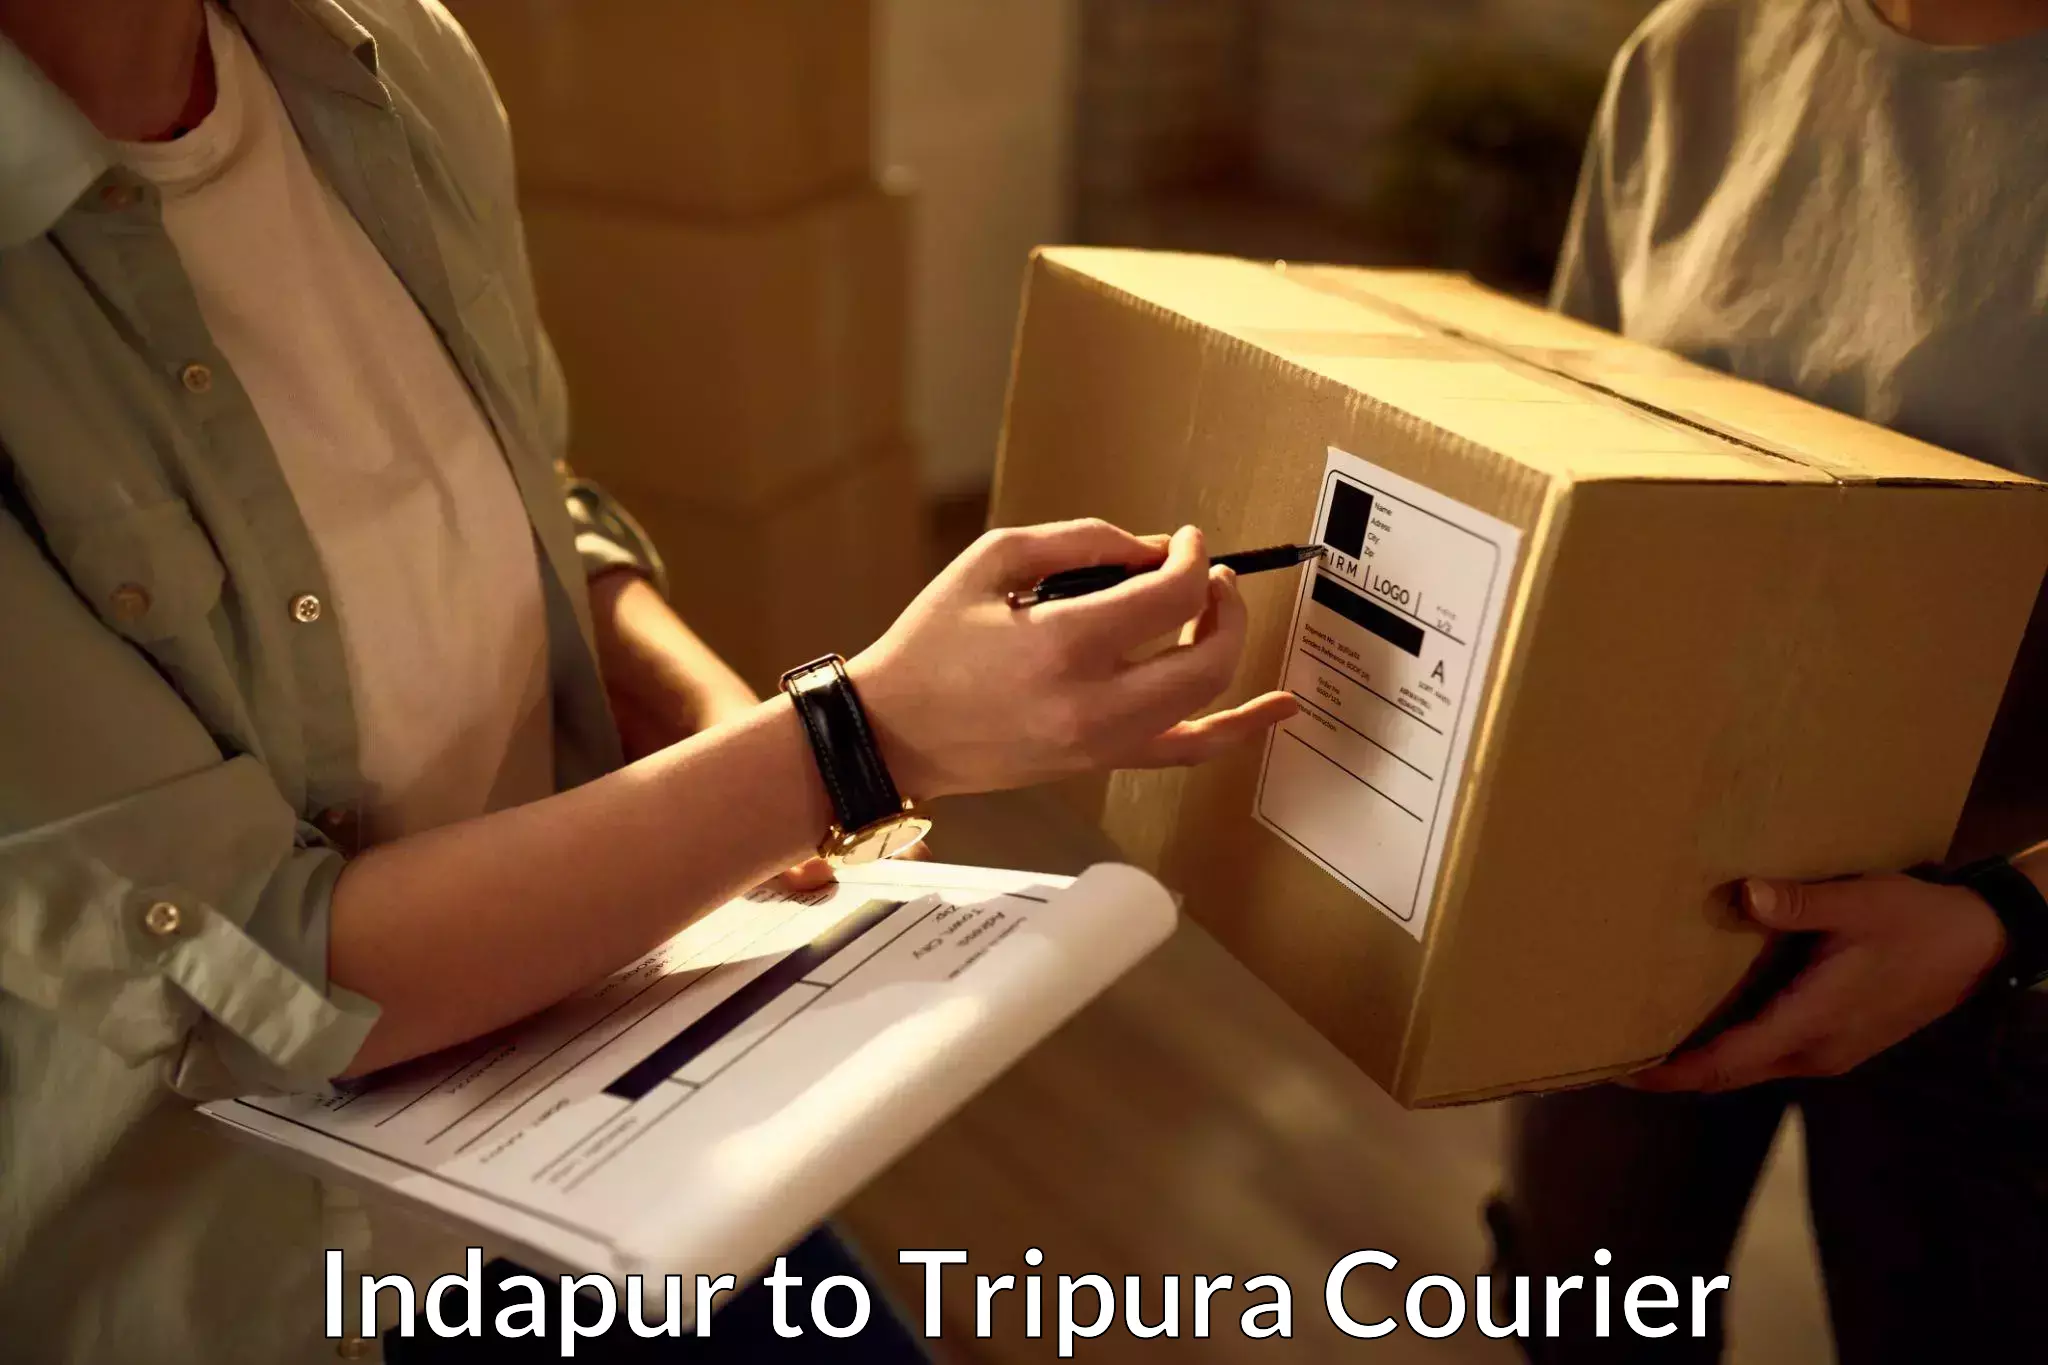 Courier insurance Indapur to Udaipur Tripura